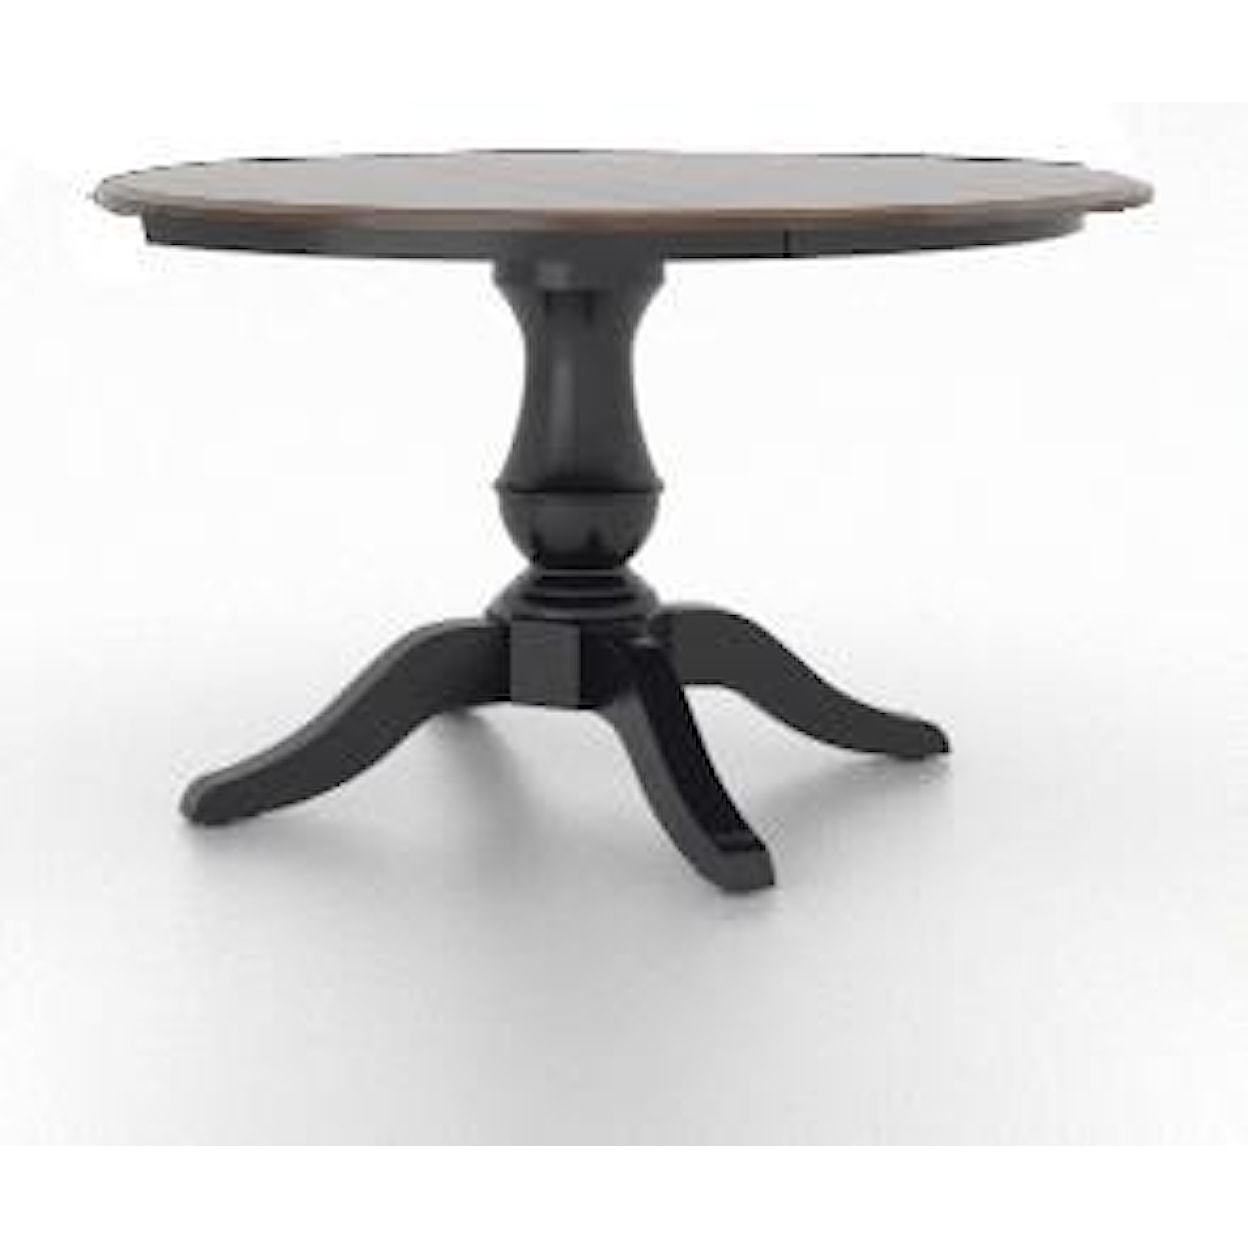 Canadel Gourmet Customizable Round Pedestal Table